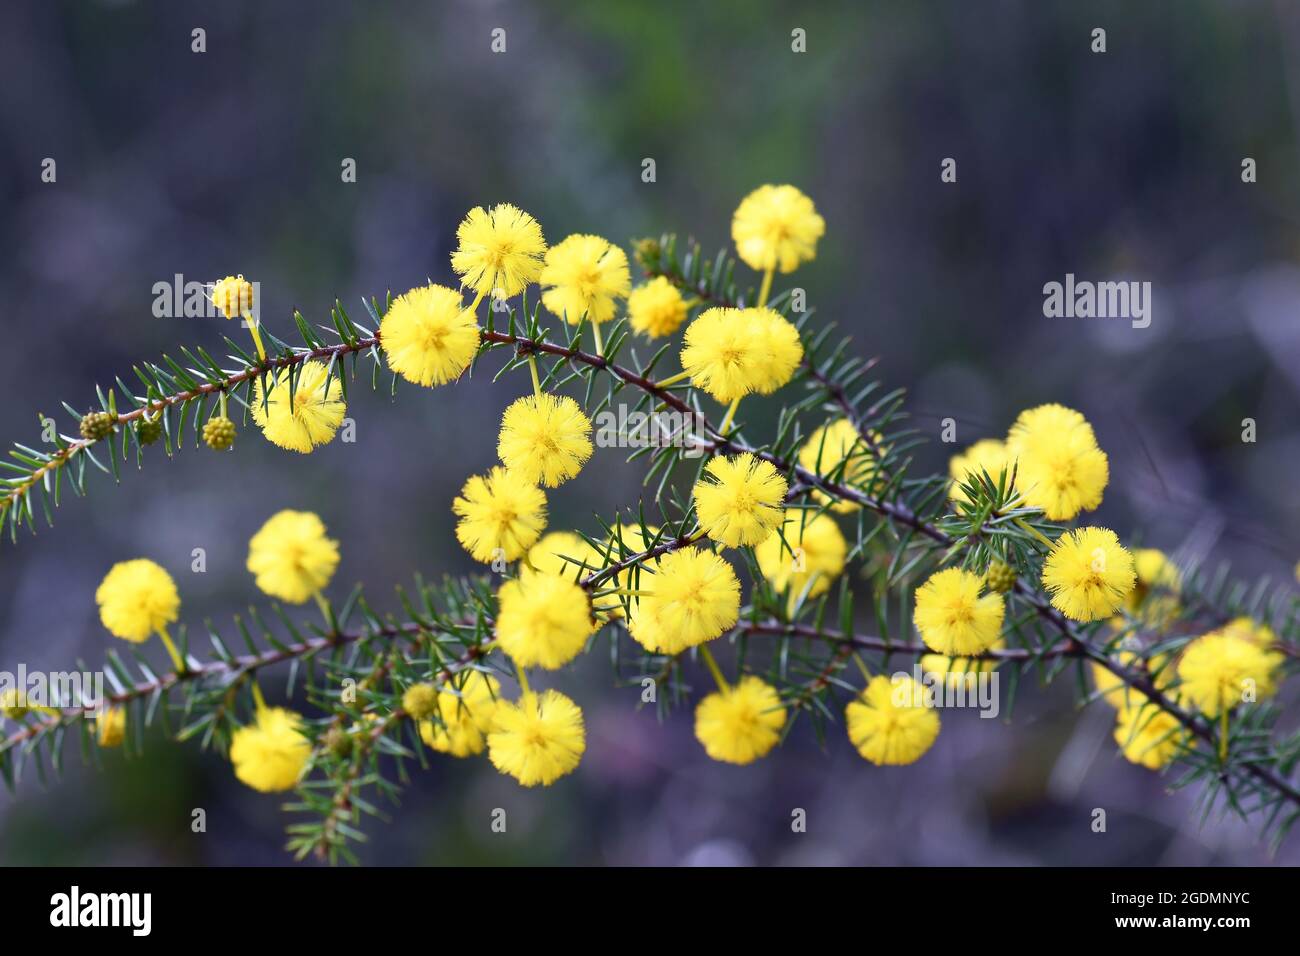 Yellow globular flowers and fine prickly leaves of the Australian native Hedgehog Wattle, Acacia echinula, family Fabaceae, growing in Sydney Stock Photo